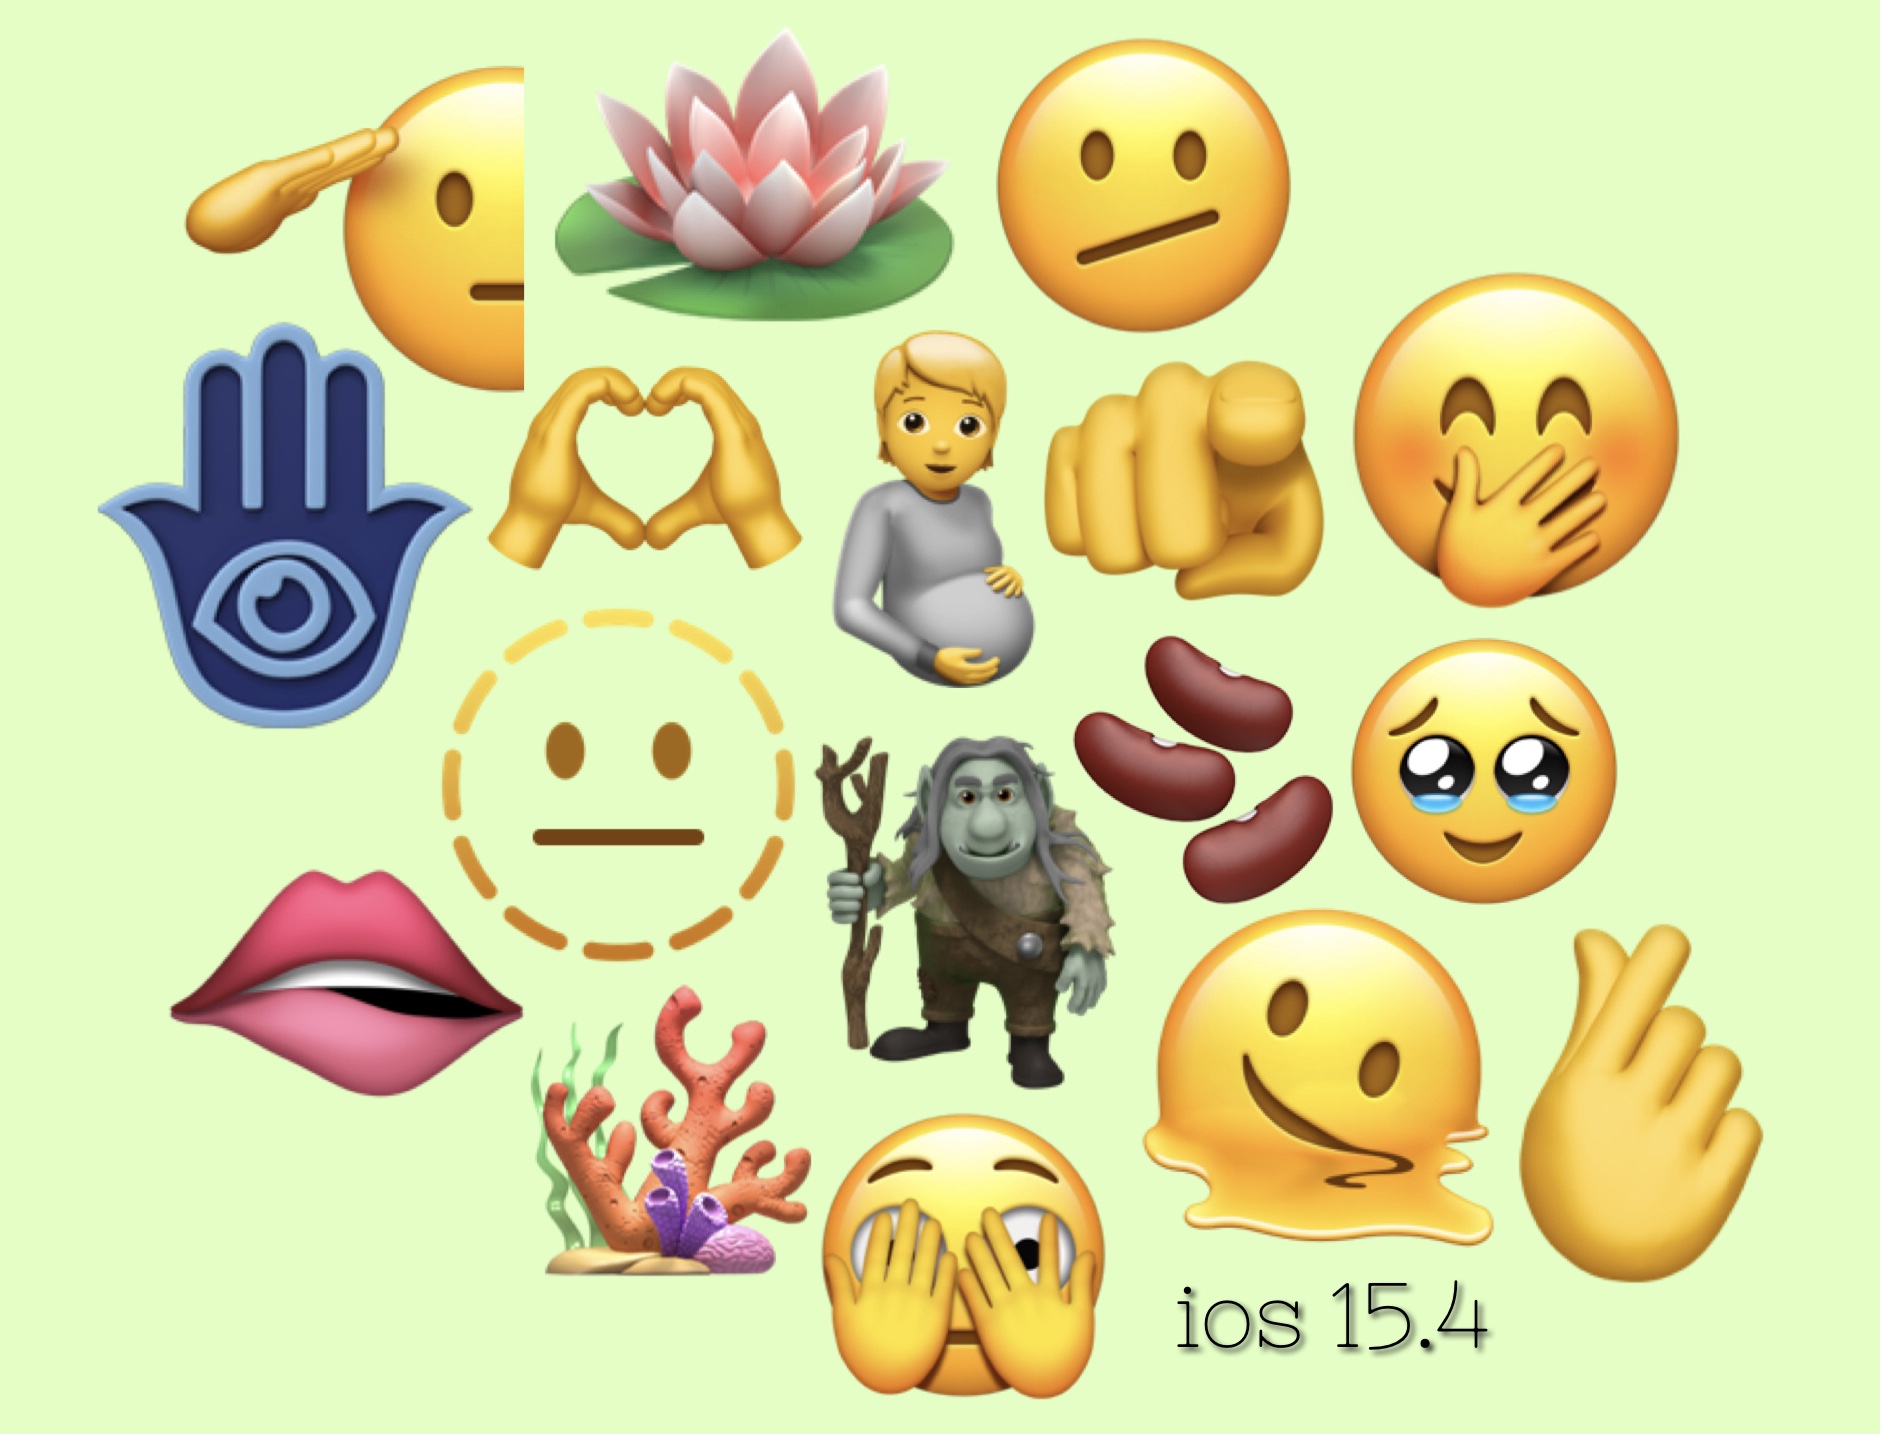 emojis style to be honest